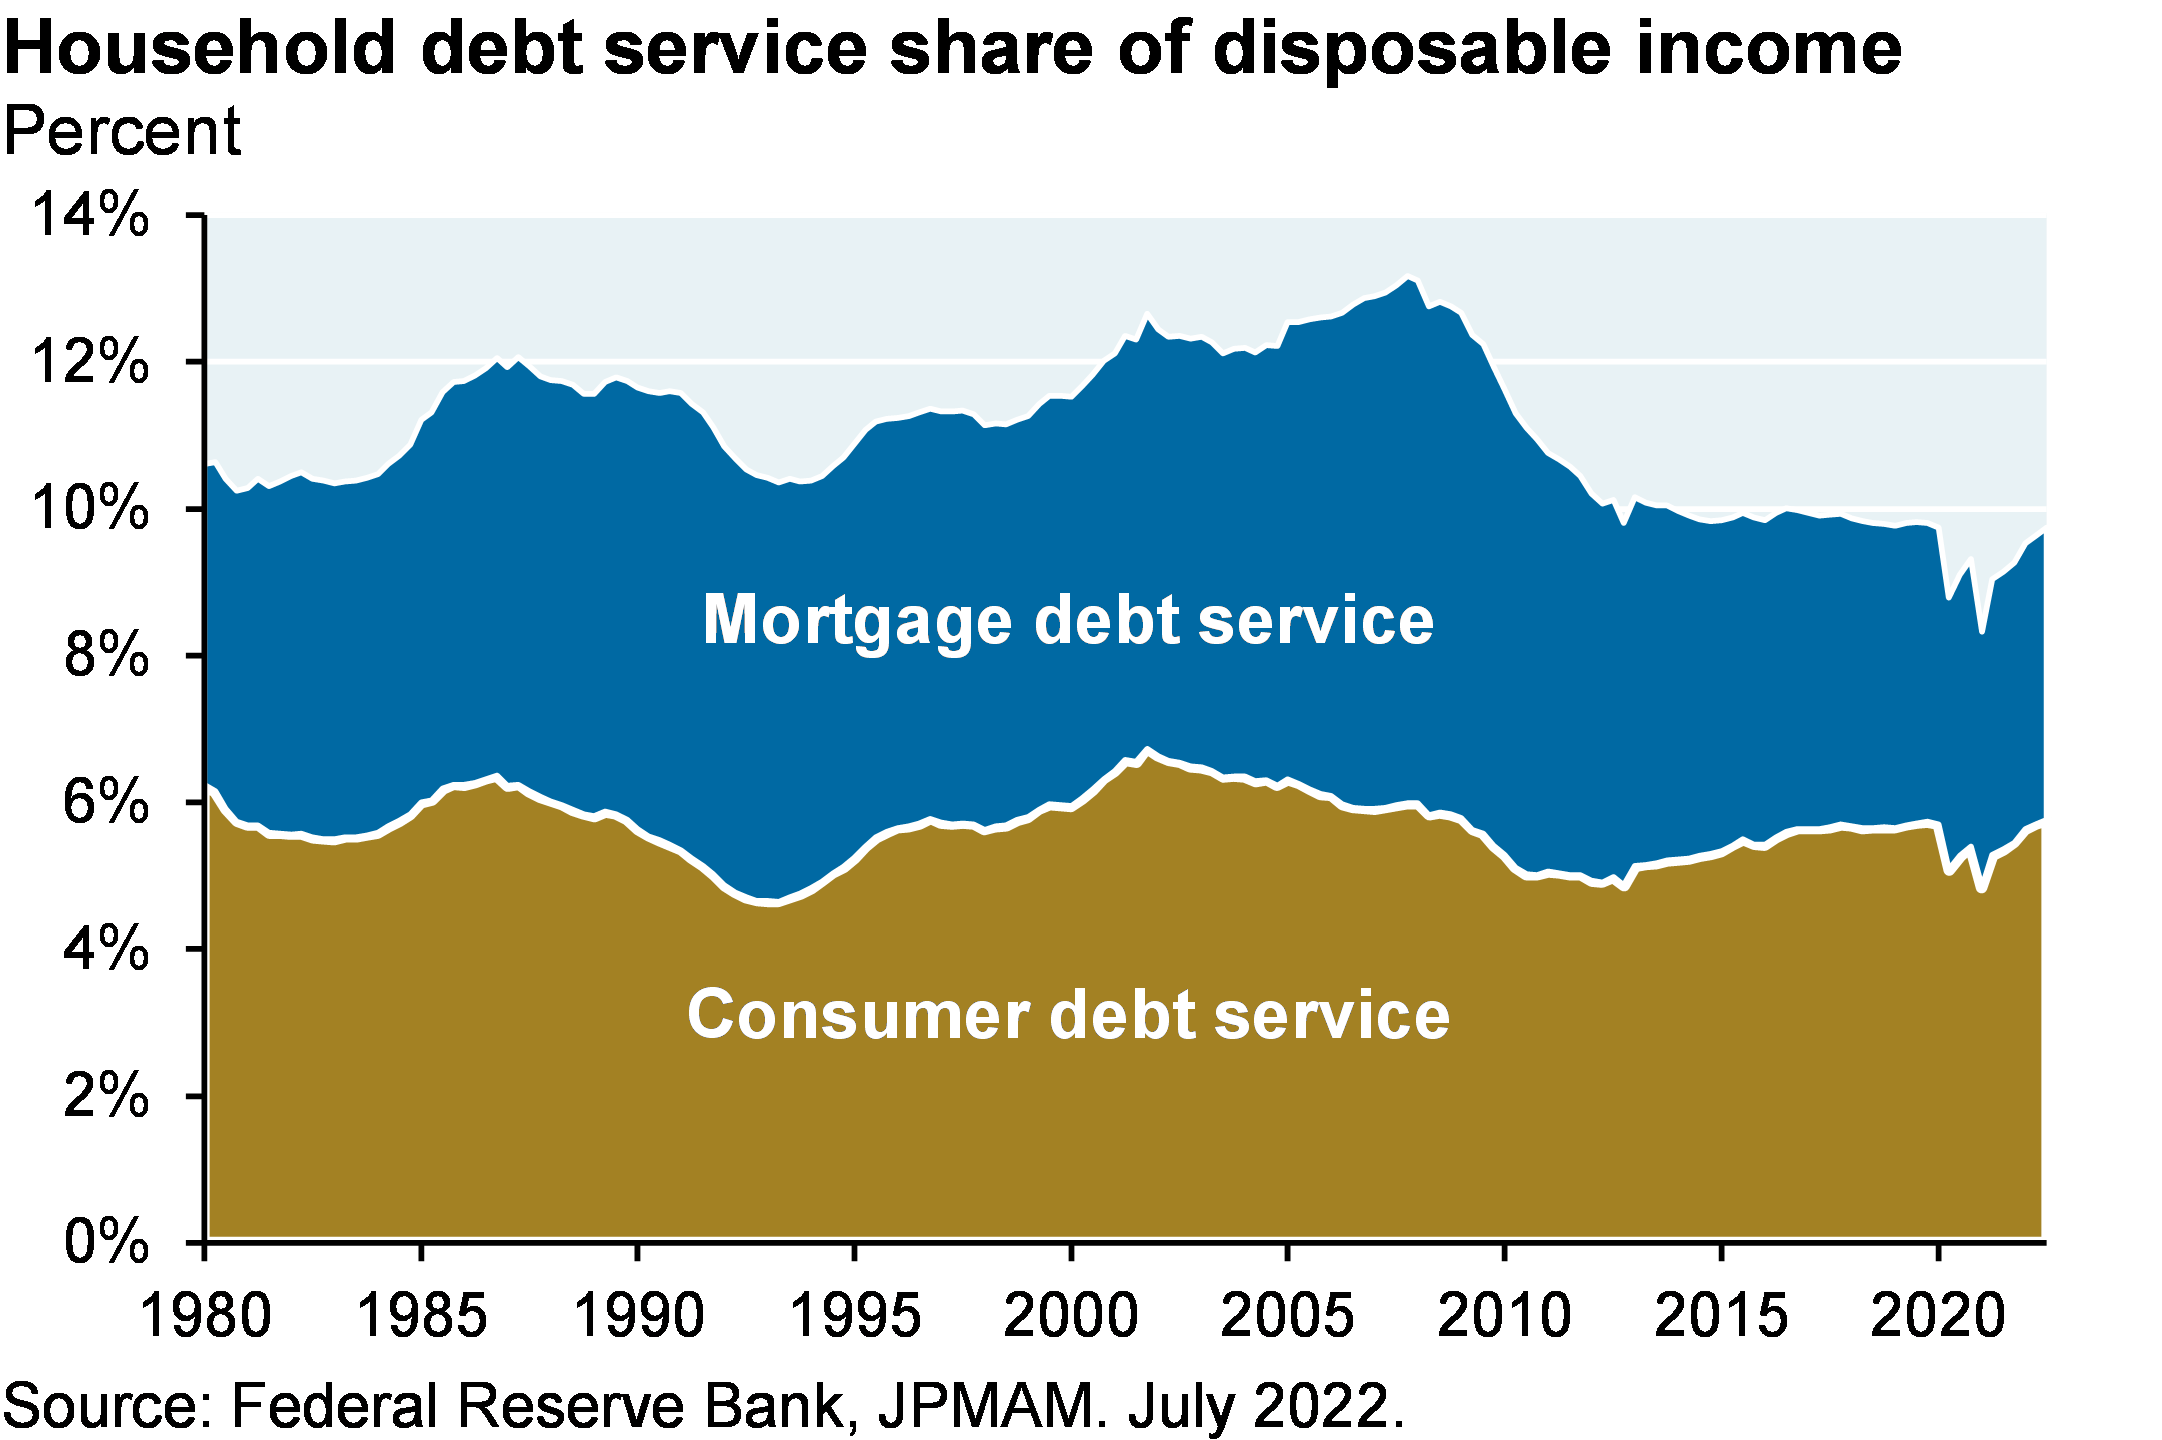 Household debt service share of disposable income